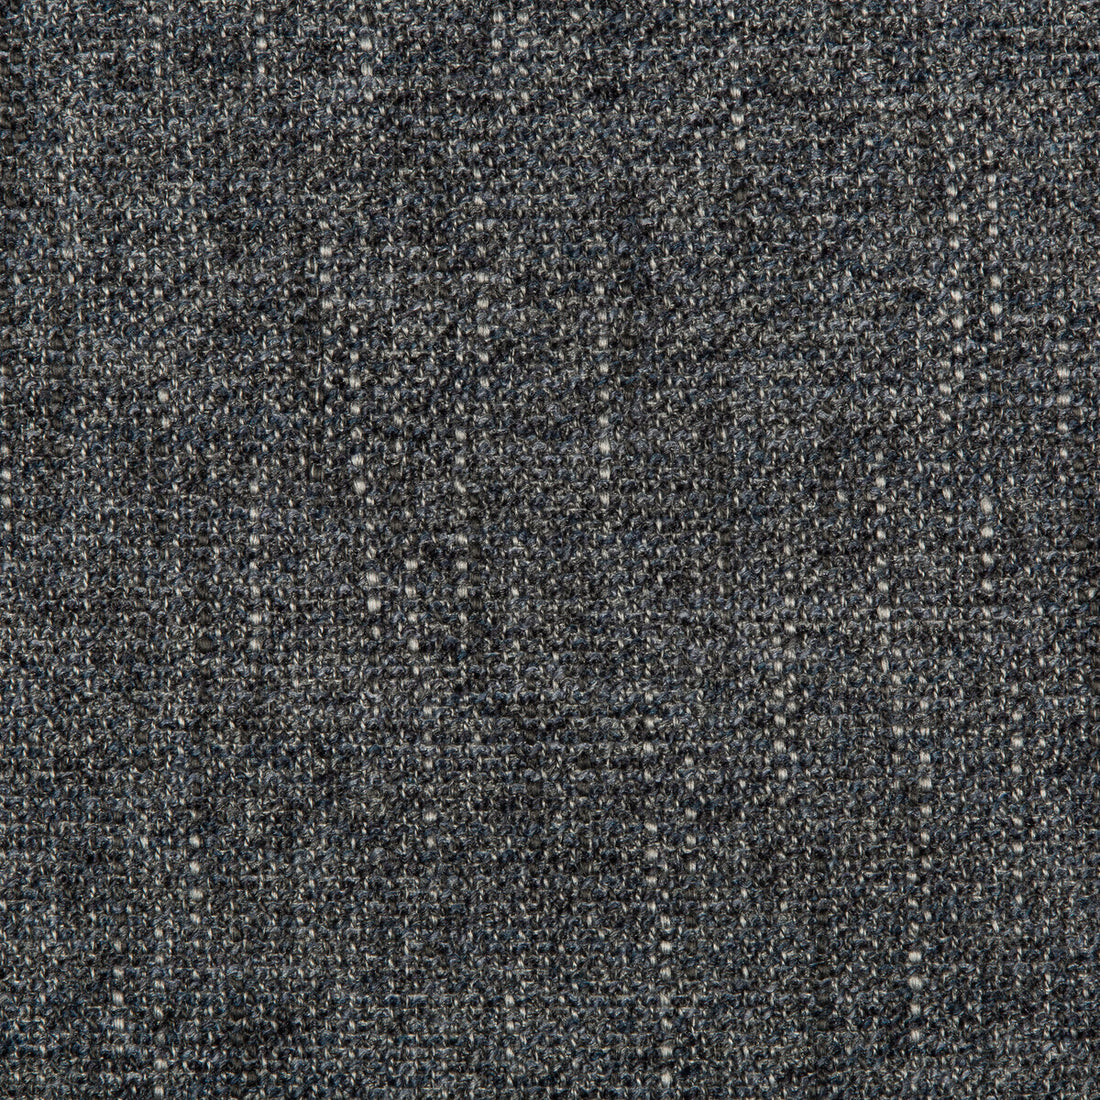 Unstructured fabric in admiral color - pattern 35375.521.0 - by Kravet Design in the Nate Berkus Well-Traveled collection